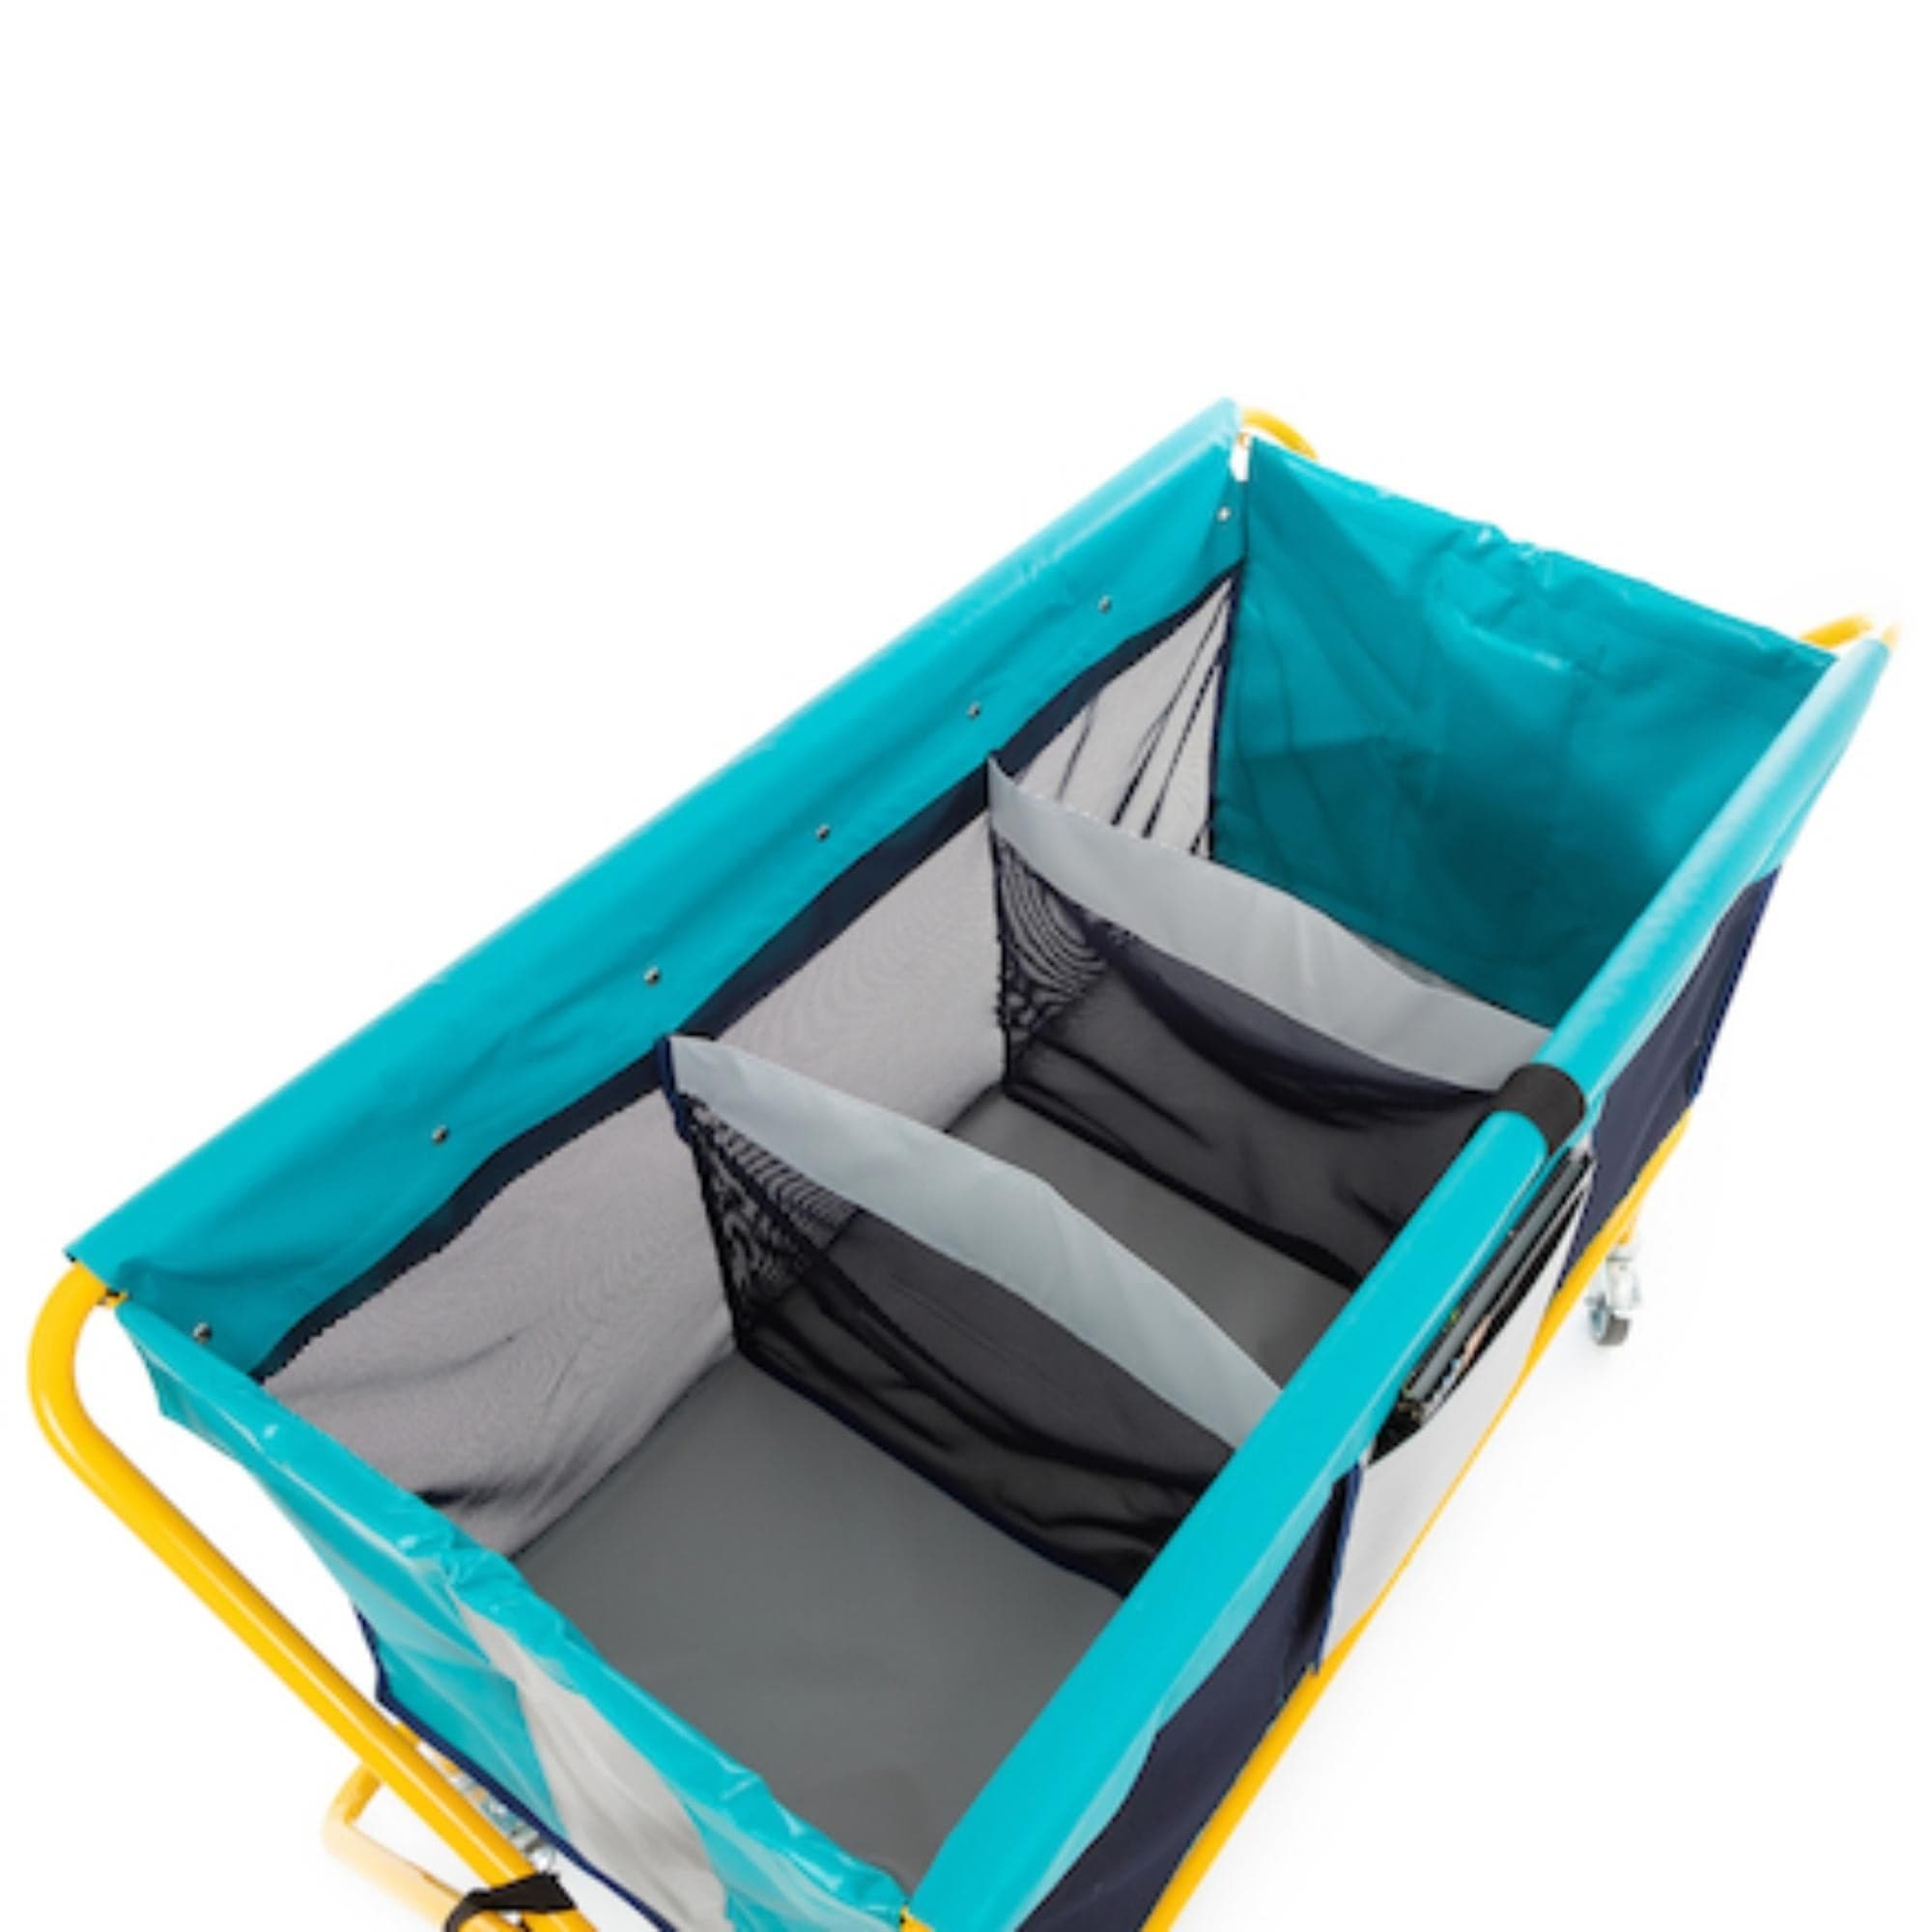 Nursery Evacuation Trolley, This fantastic Nursery Evacuation Trolley is ideal for emergencies. Use the Nursery Evacuation Trolley for transporting a number of small children within a building.The Nursery Evacuation Trolley features heavy duty castors and fabric sides, the strong frame folds flat, making it very easy to store. The fabric can be wiped clean using a damp cloth with mild detergent. The Nursery Evacuation Trolley has three compartments so older children can be separated from young babies. Devel